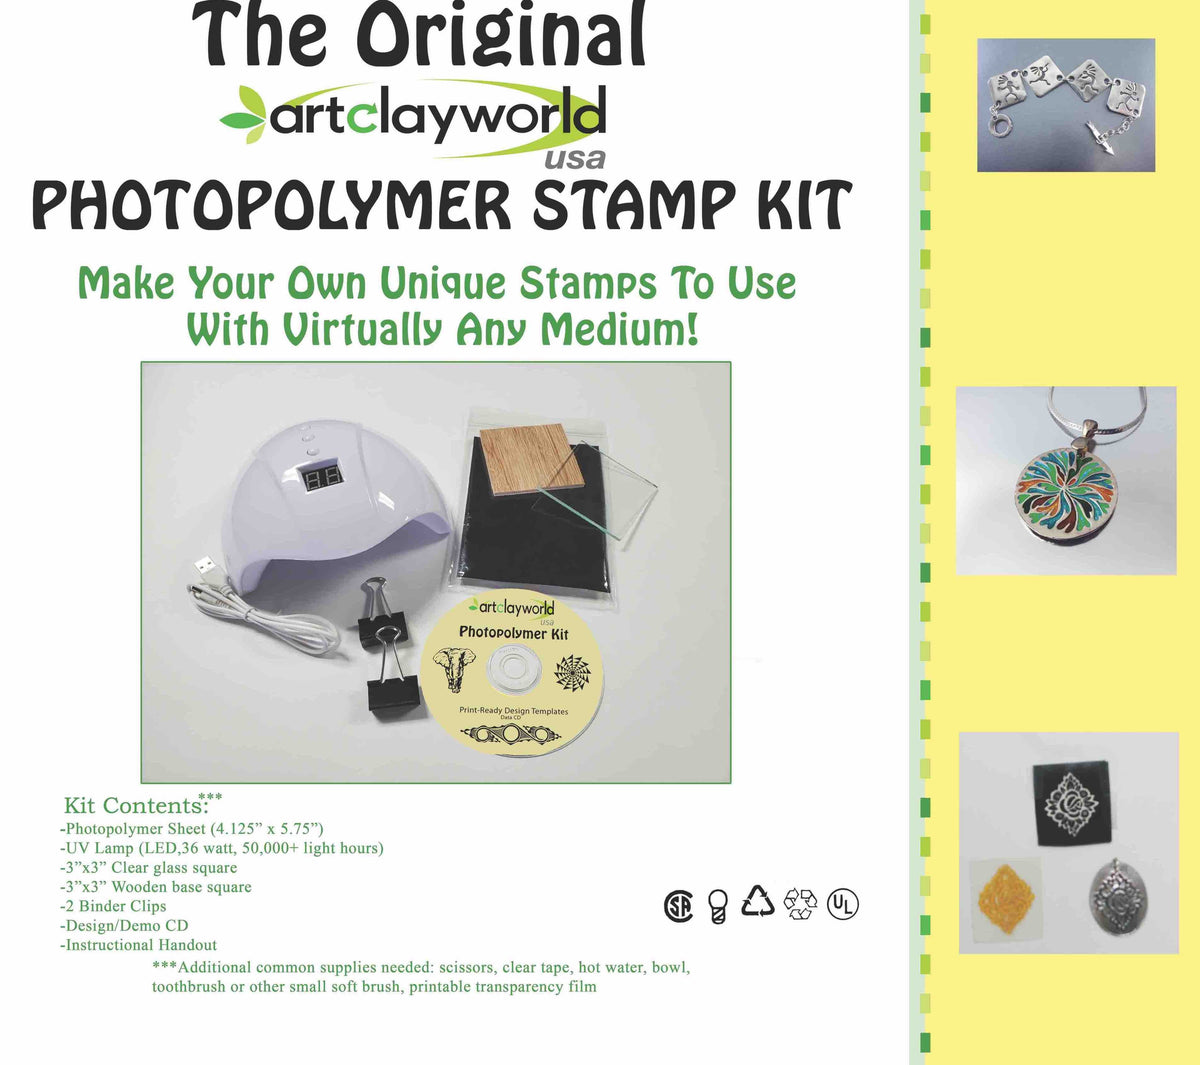 Photopolymer Kit making your own stamps